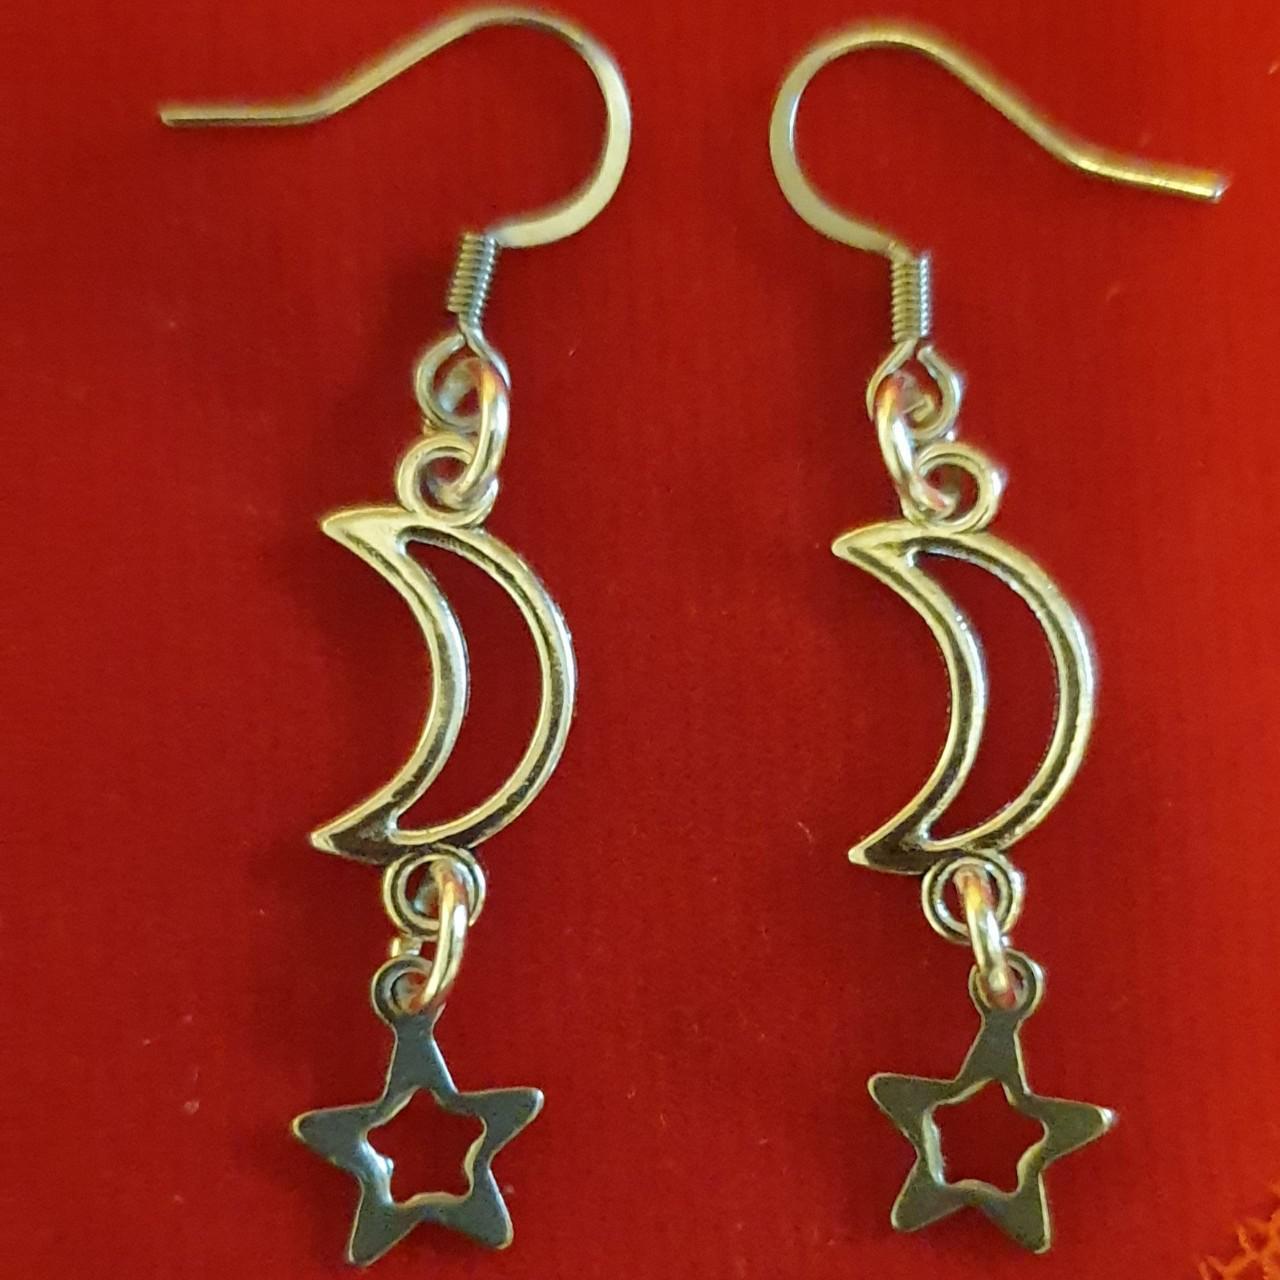 Product Image 2 - Earrings
Moon and Dream catcher or
Moon